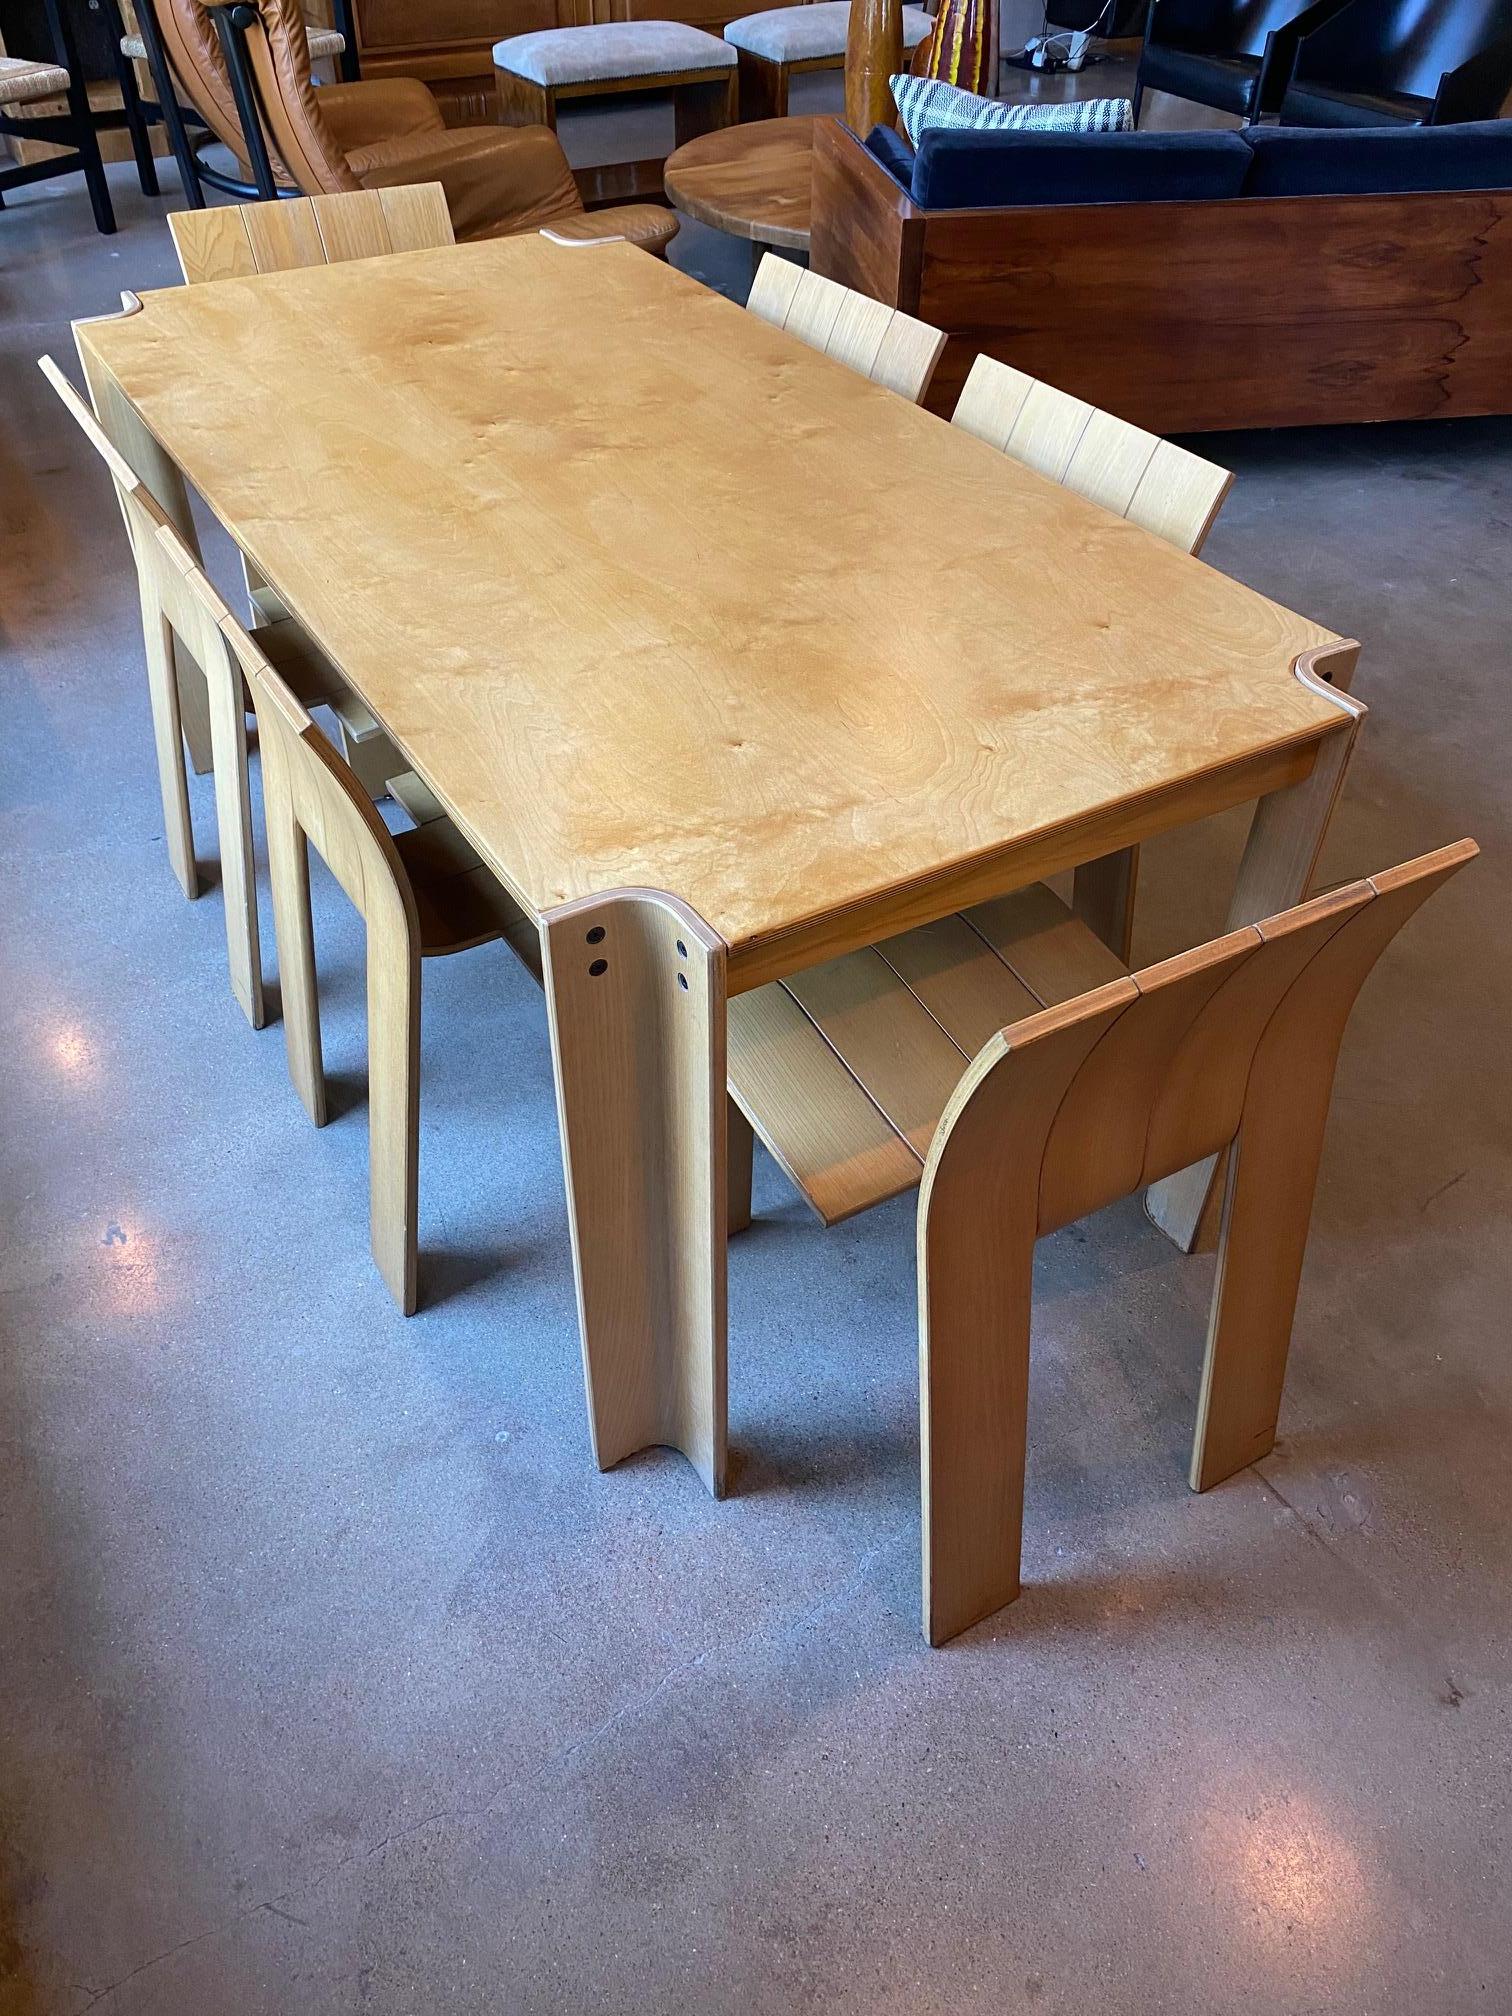 Ash Bakker “Strip” Dining Table and Chair Set, NL, 1970’s For Sale